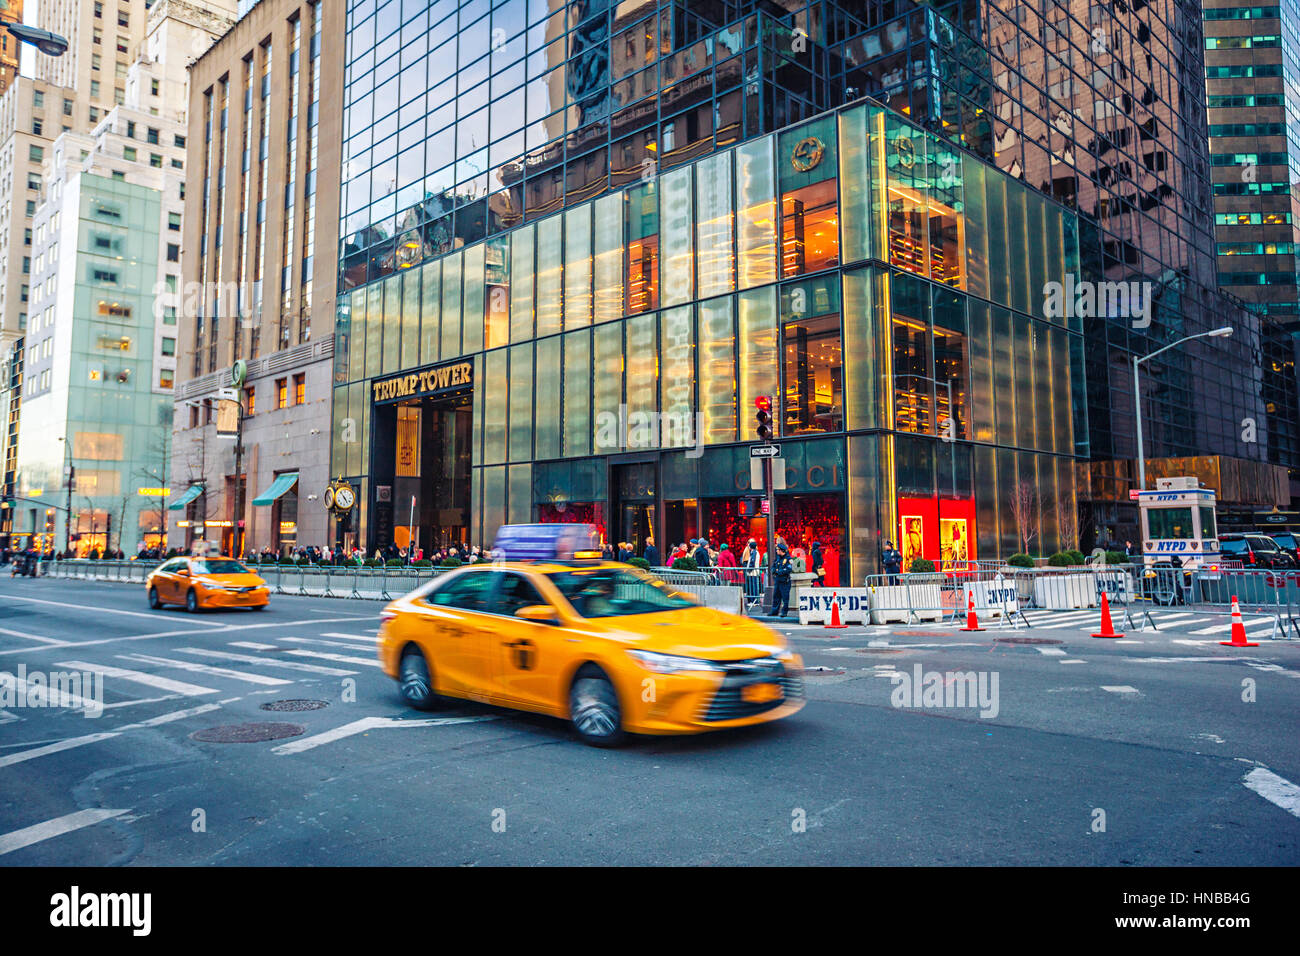 Taxi on fifth street in front of Trump Tower, Manhattan, New York Stock Photo